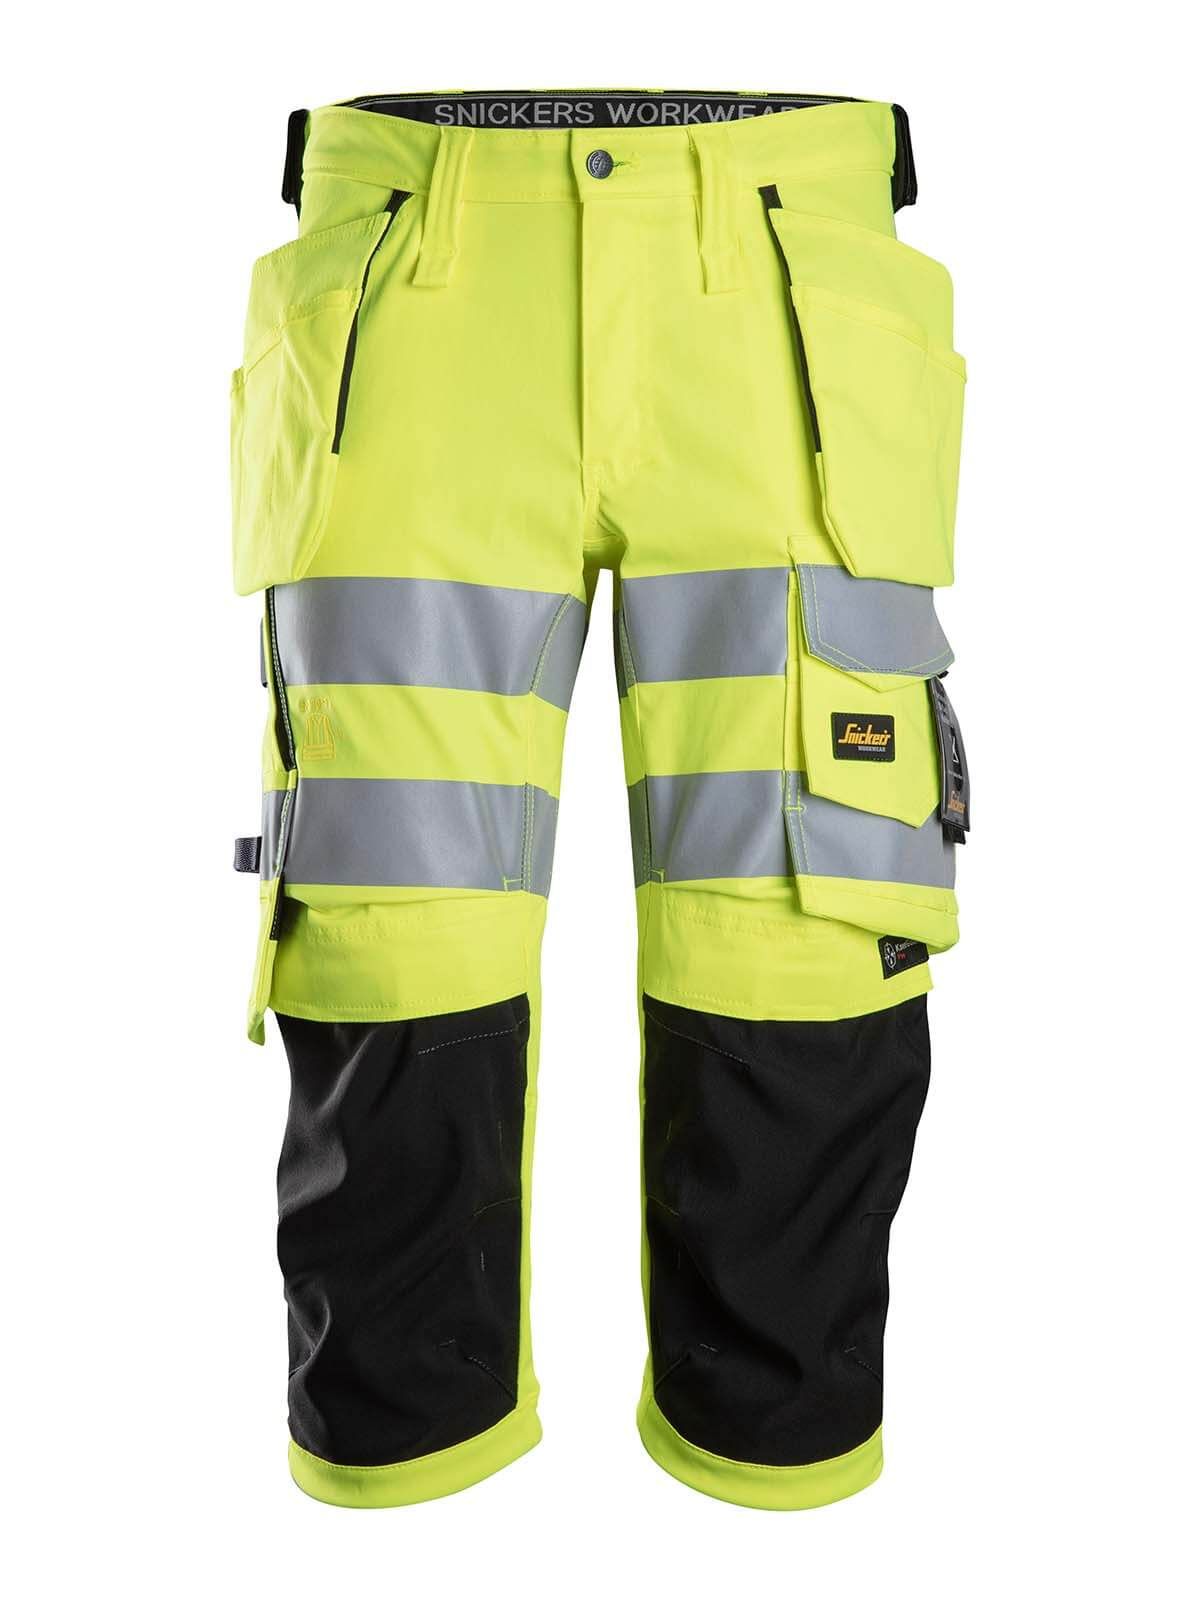 Snickers 6943 HiVis Class 2 Stretch Work Trousers Holster Pockets